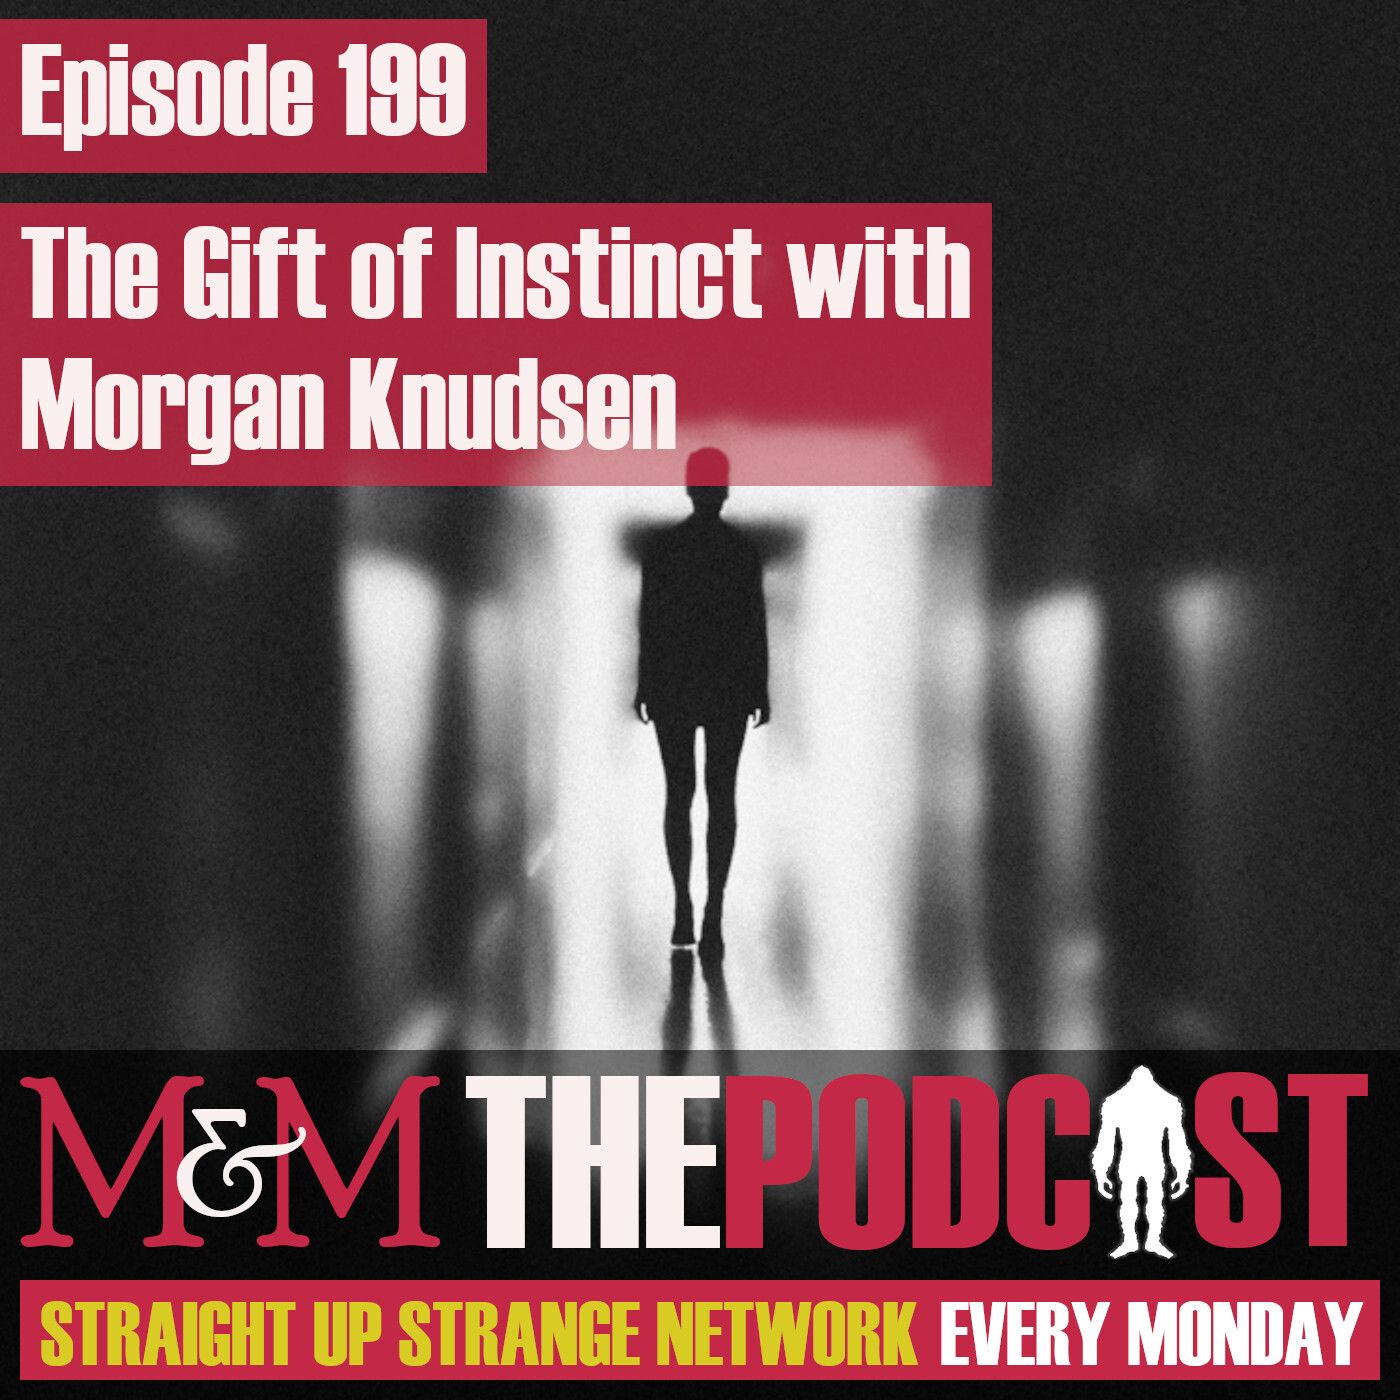 Mysteries and Monsters: Episode 199 The Gift of Instinct with Morgan Knudsen